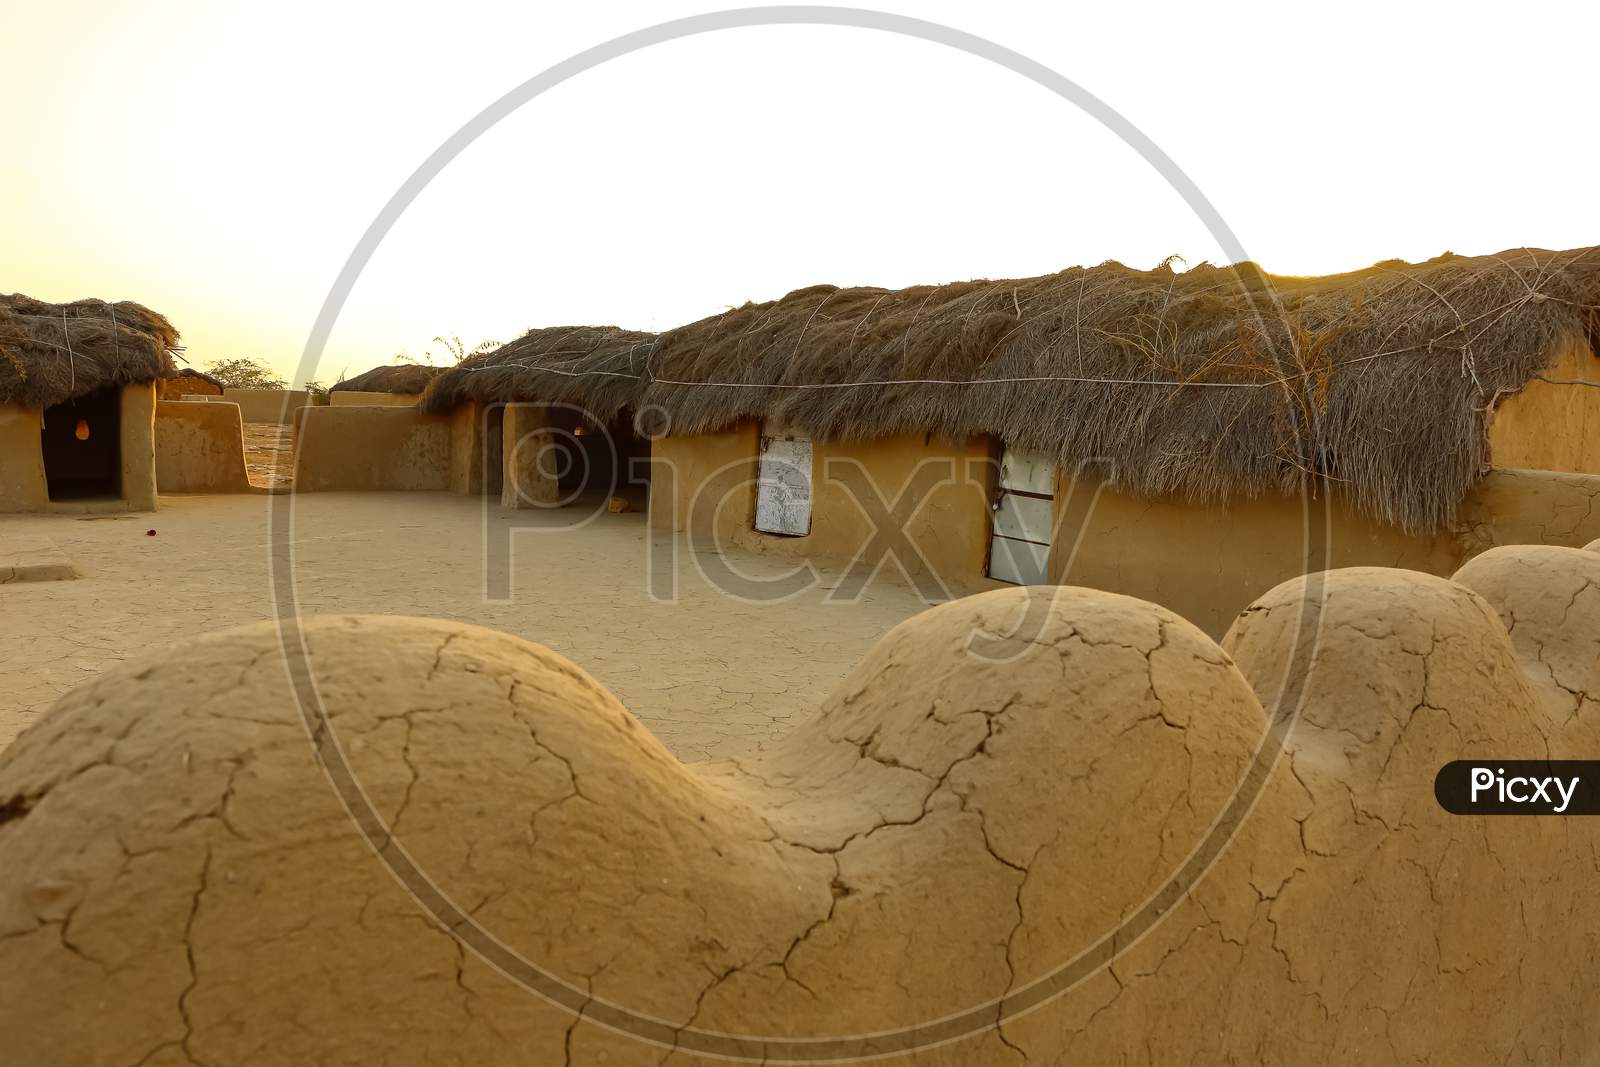 image of a mud house with thatched roof in an village in Rajasthan India